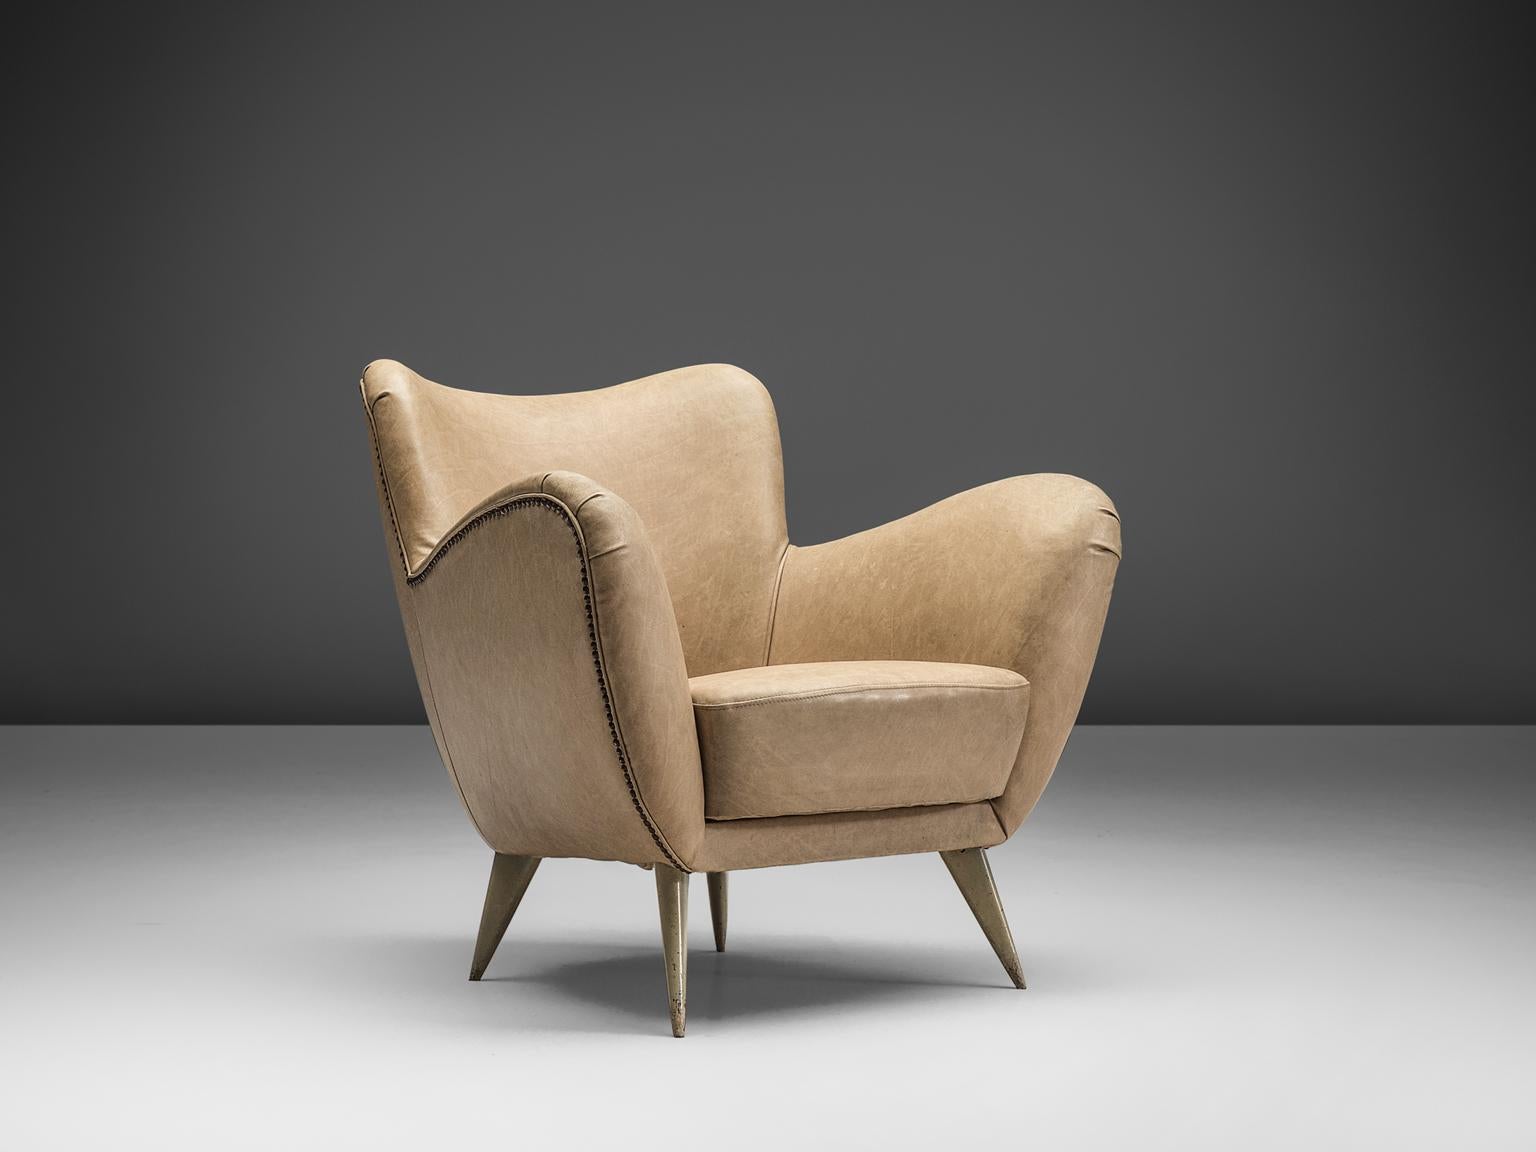 Giulia Veronesi for I.S.A. Bergamo, 'Perla' short wingback chair, with beige leather and painted wood, Italy, 1950.

Curveous, organic and sculptural, this chair is anything but minimalistic. The small diagonal feet feature a triangle shaped and